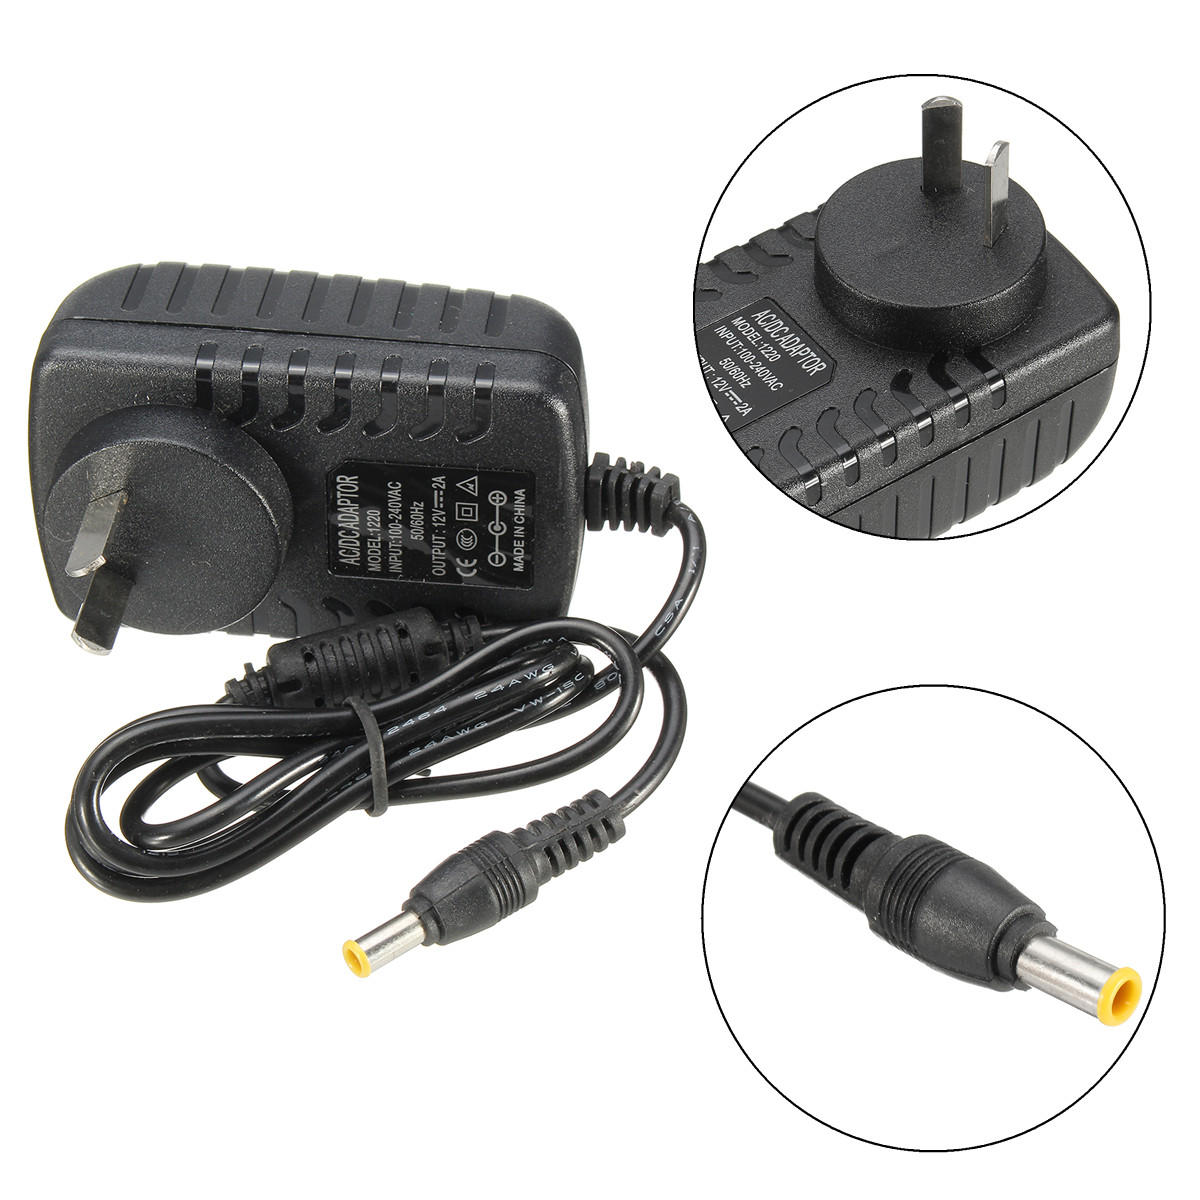 Image of 12V 2A Adapter fr Makita BMR100 BMR101 JobSite Radio Switching Power Supply Cord Wall Plug Charger